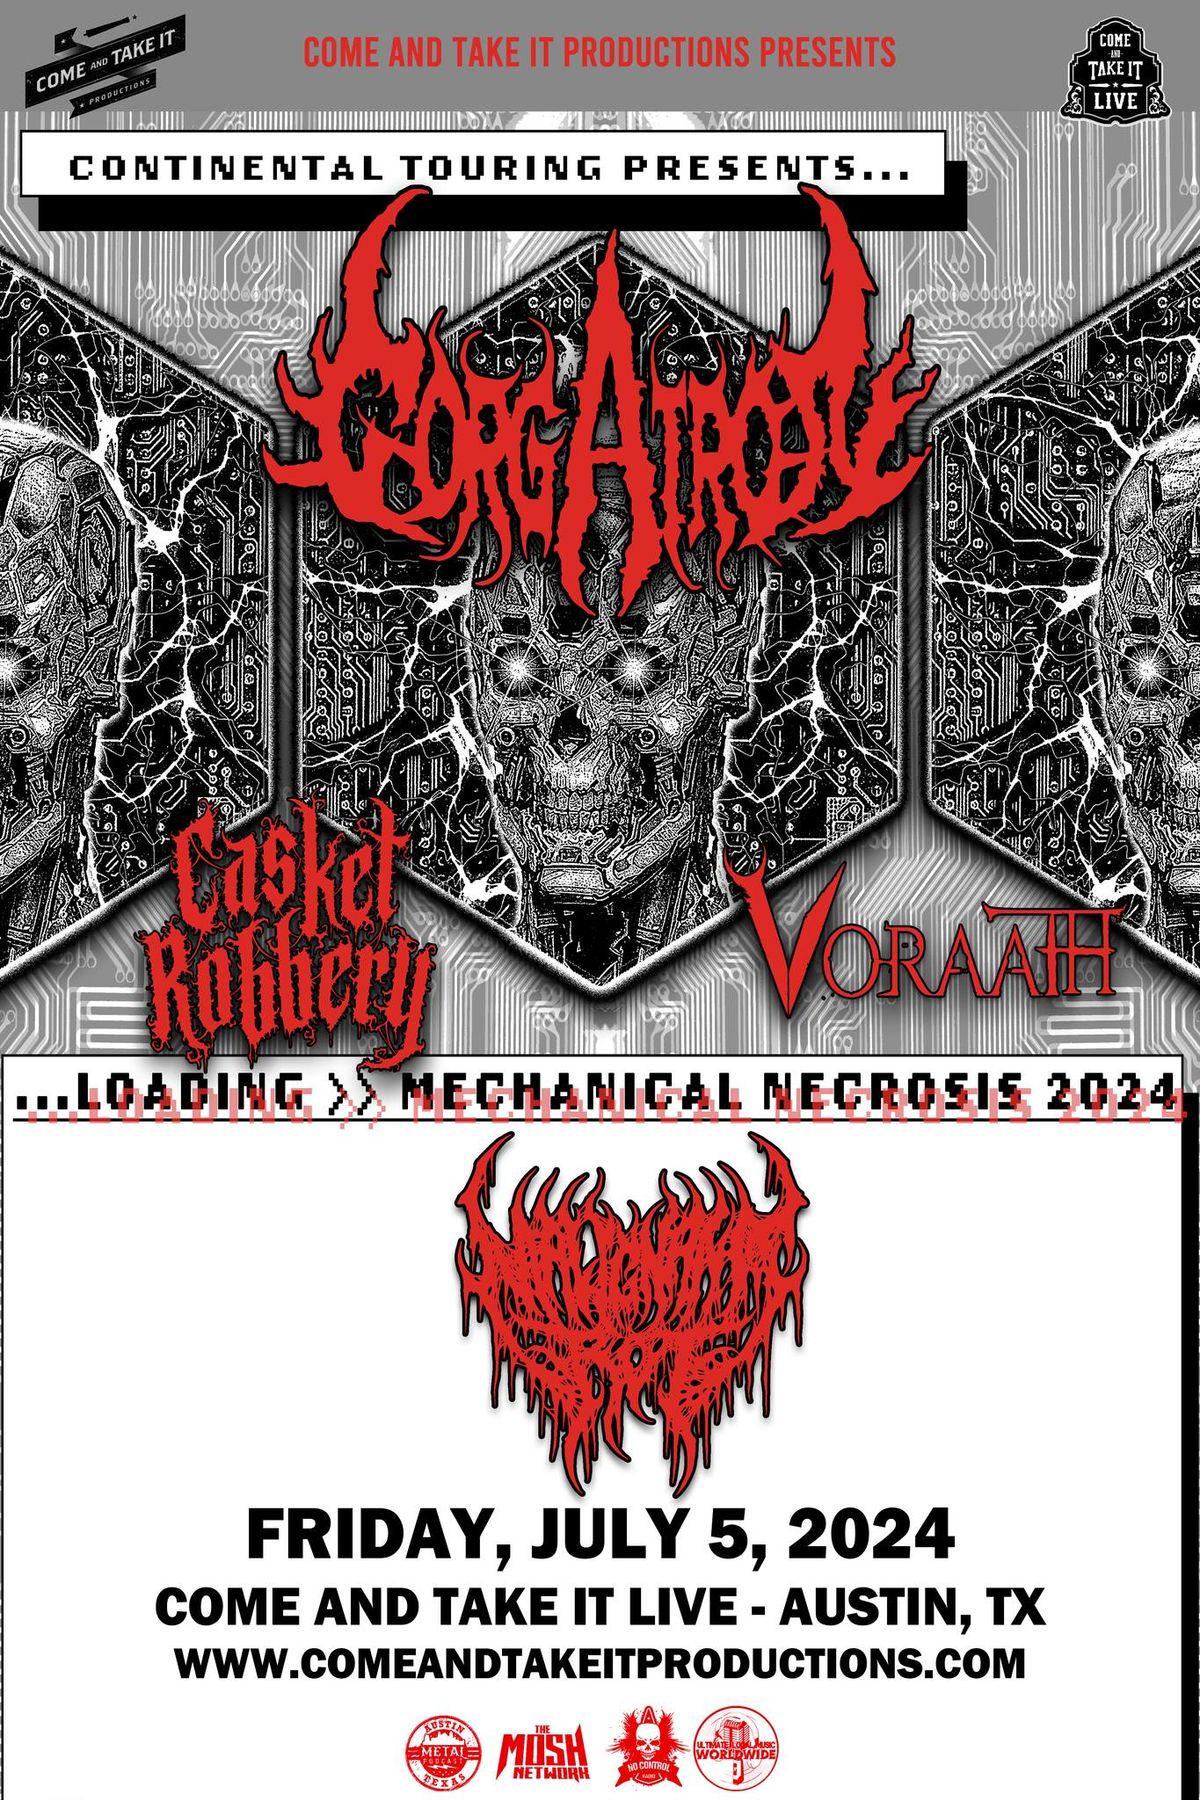 Gorgatron, Casket Robbery, and Voraath at Come and Take It Live!